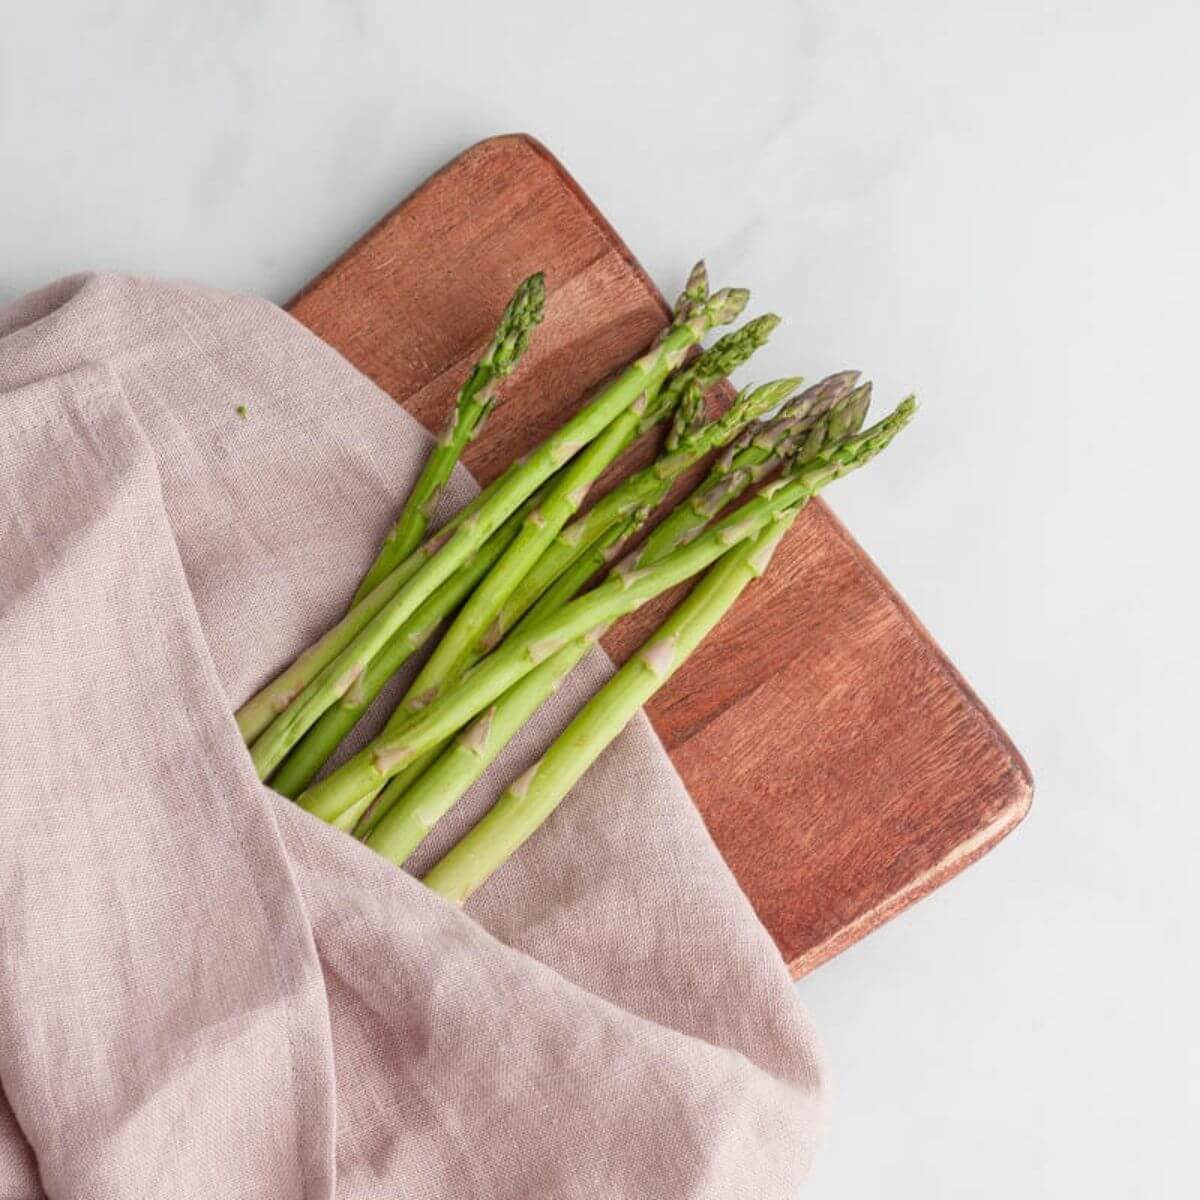 asparagus folded in rose colored tea towel on counter